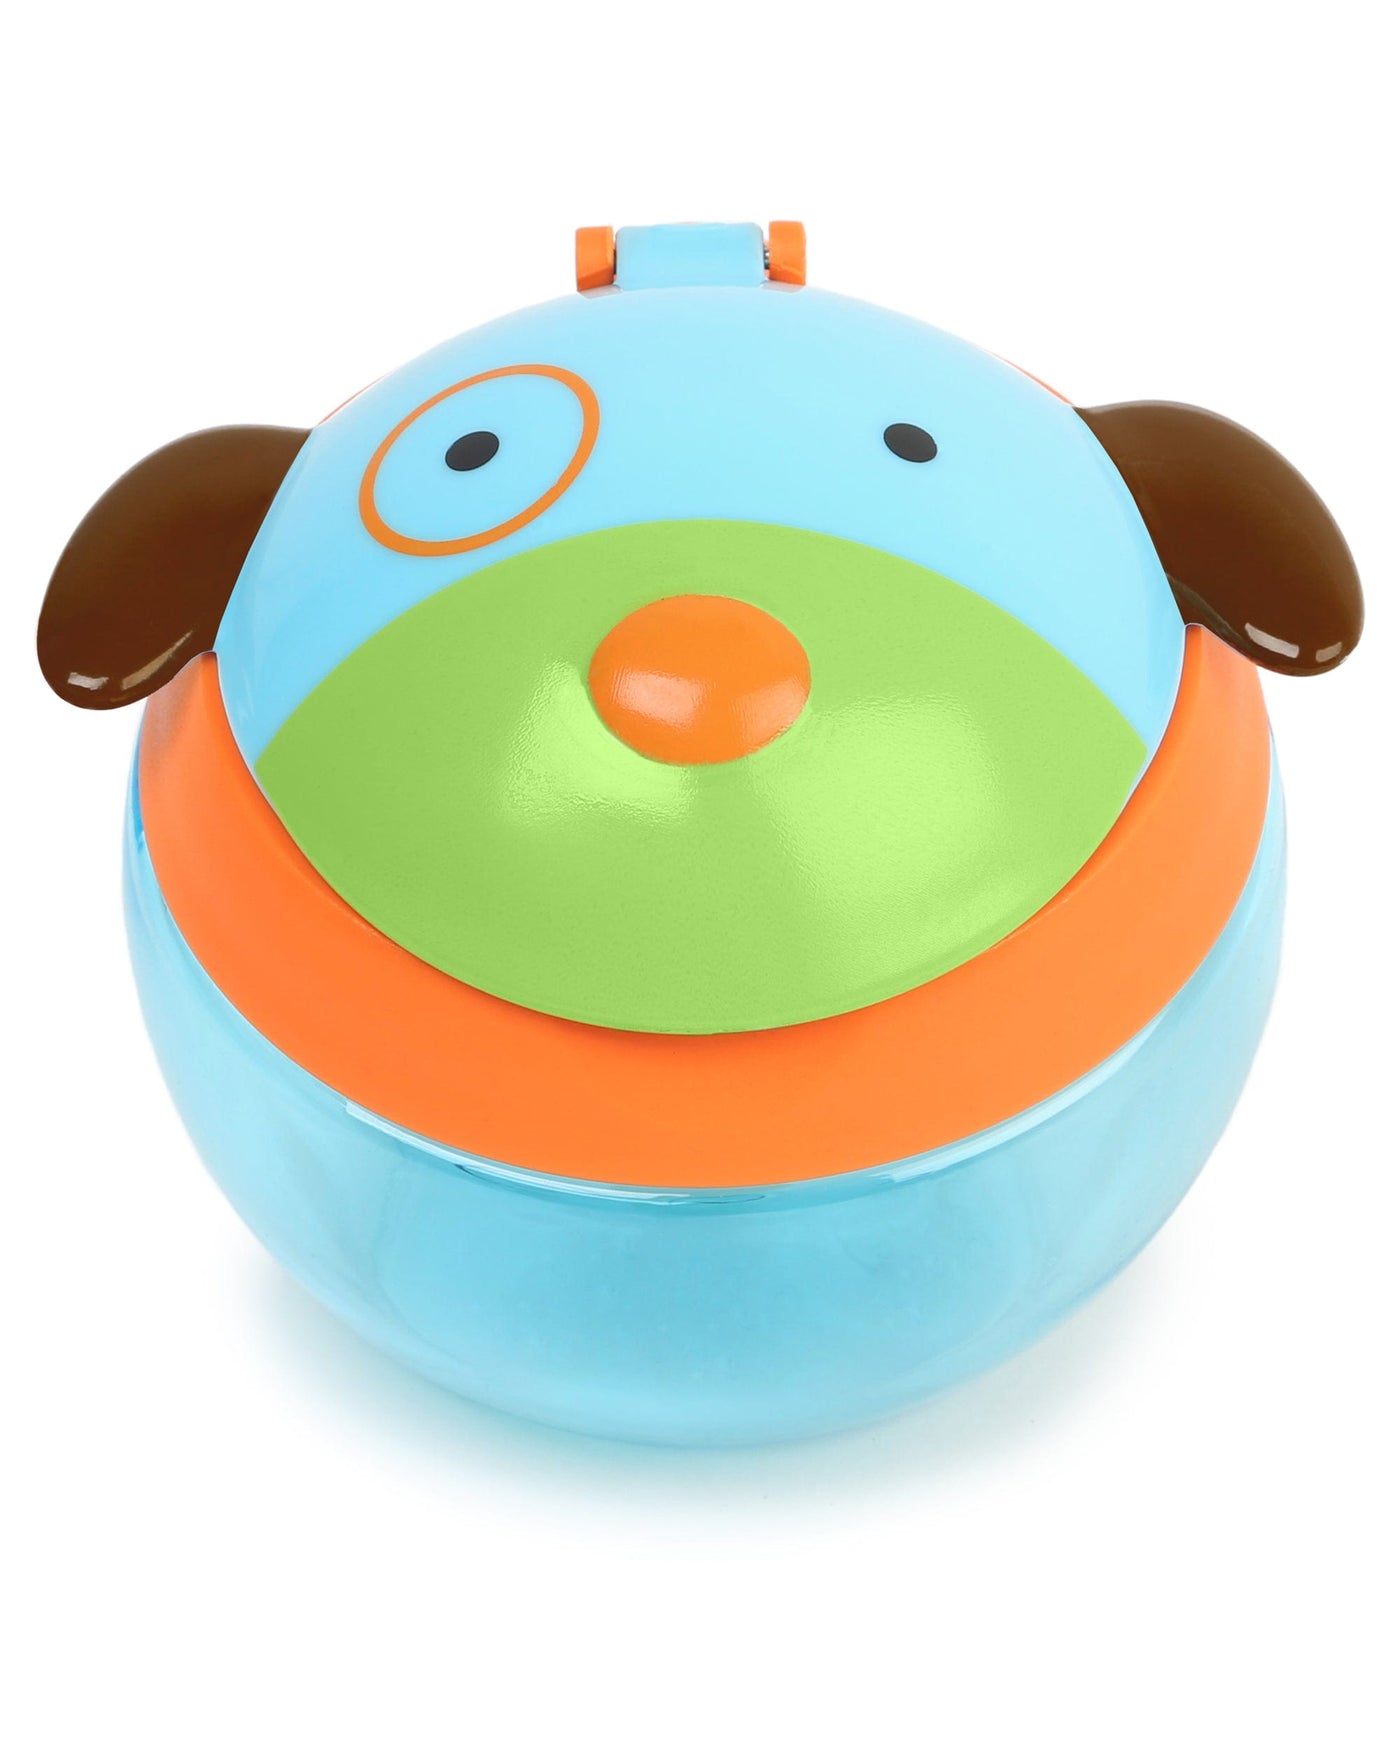 Zoo Snack Cup - Dog | Skip Hop® by Skip Hop, USA Baby Care